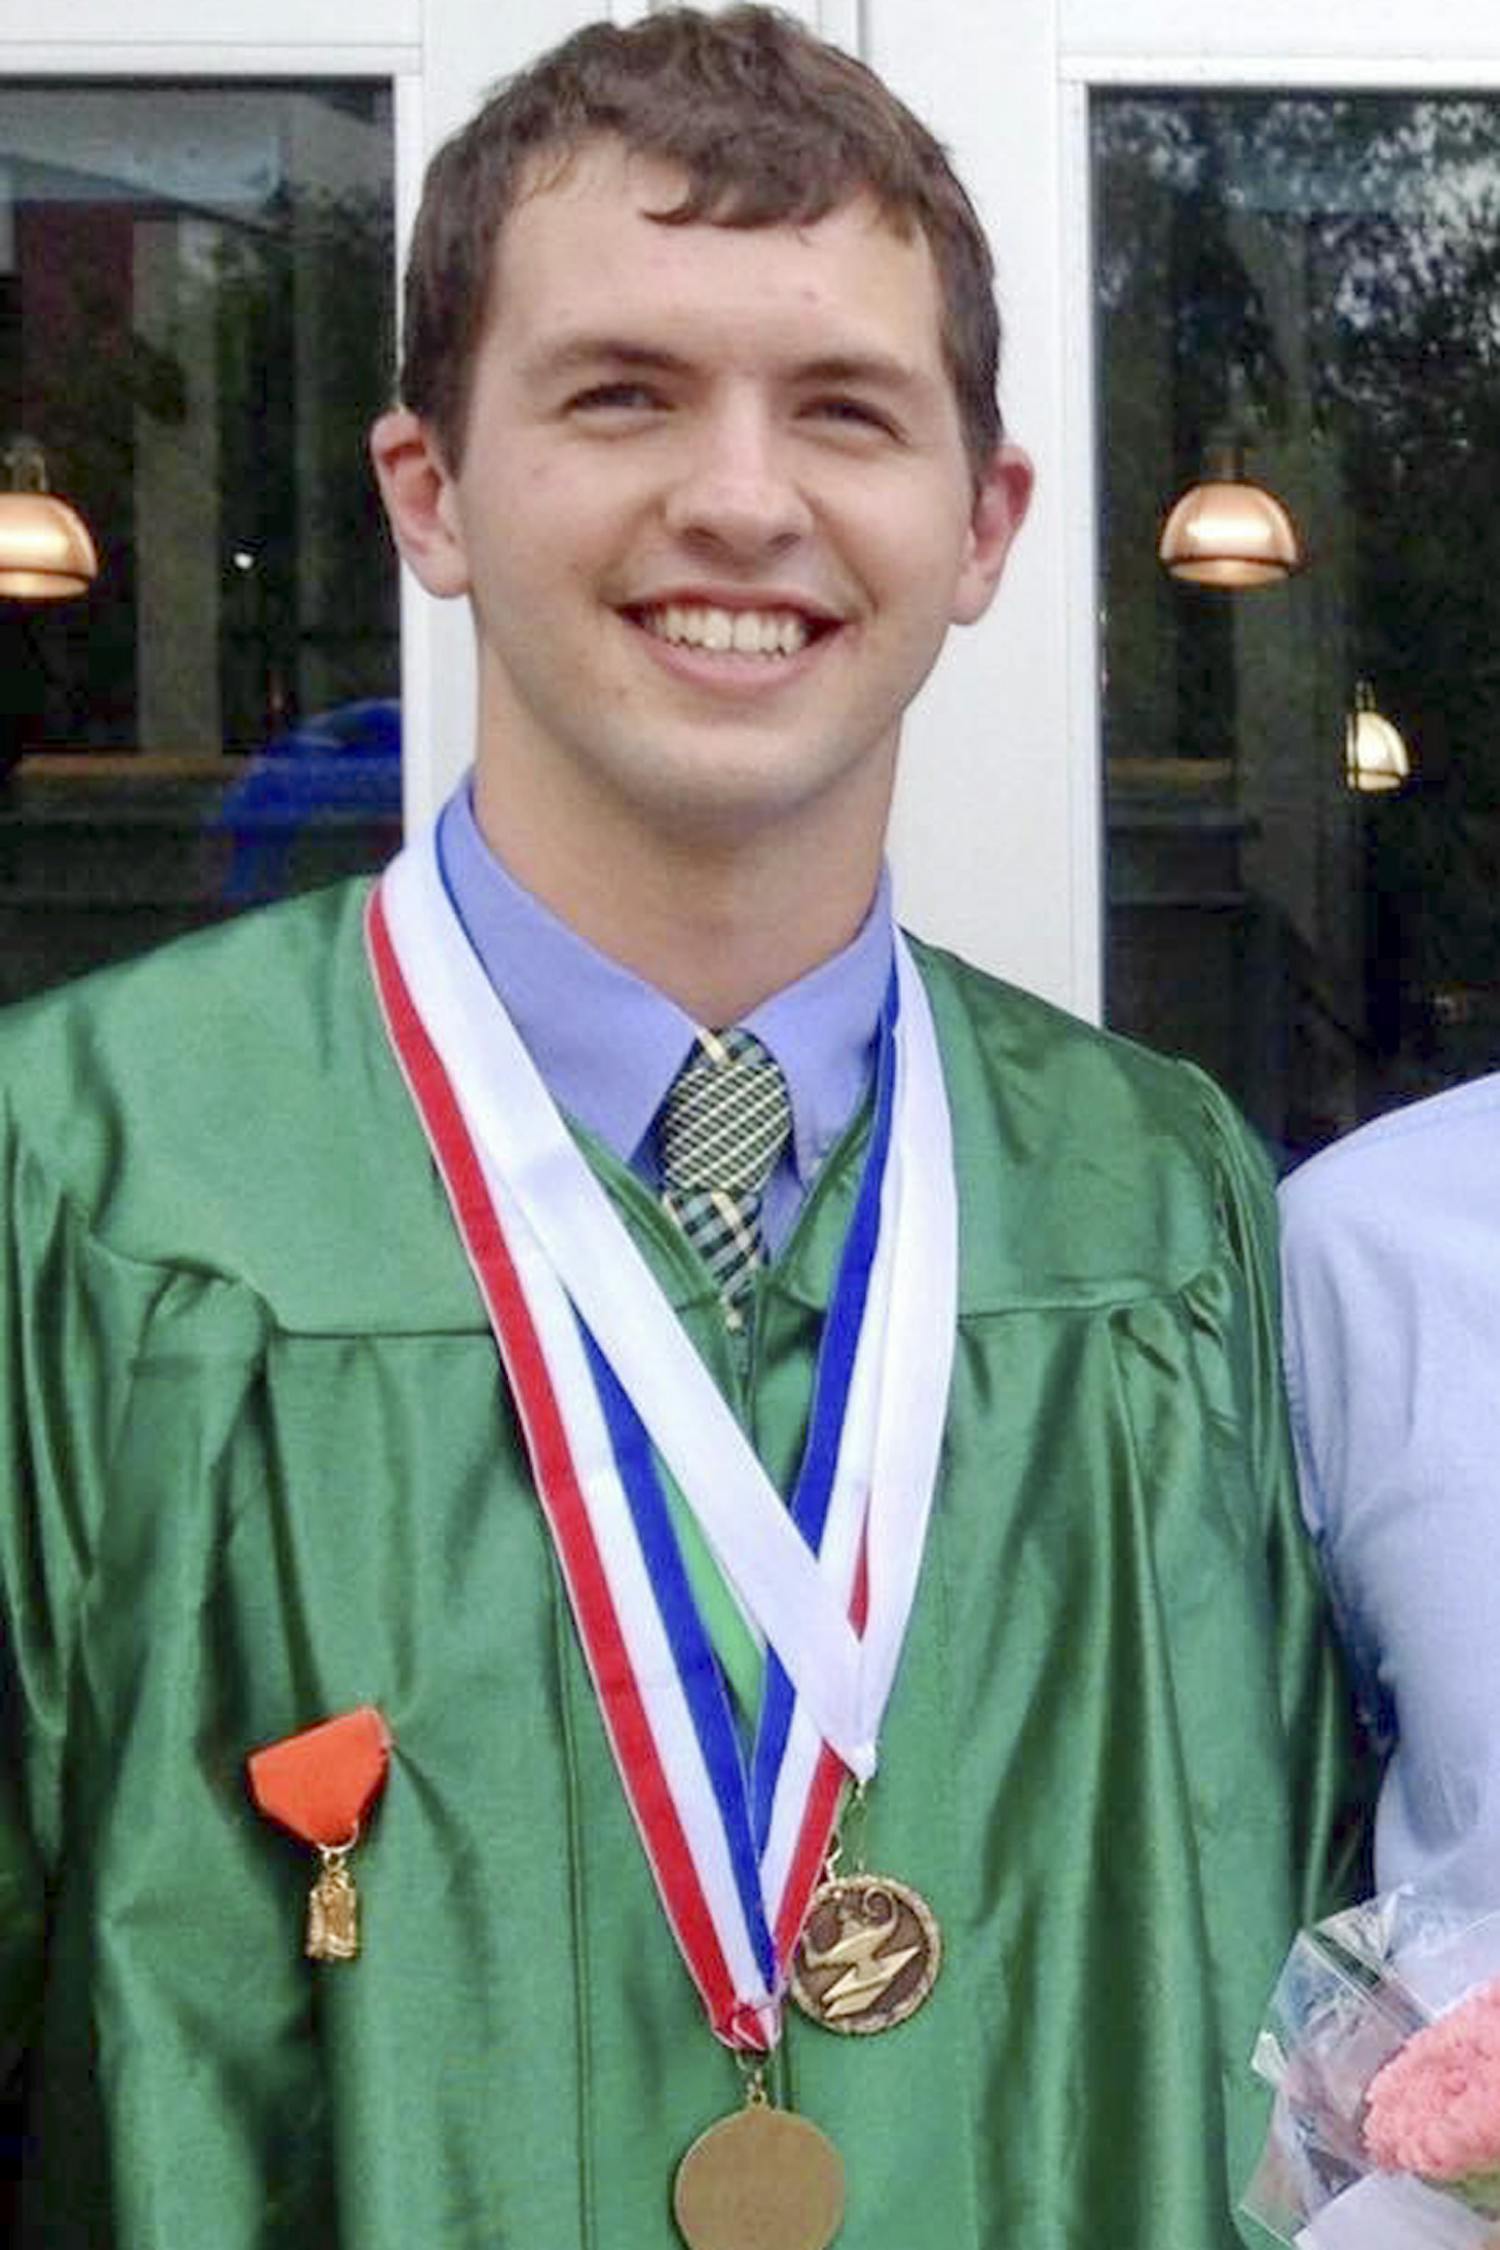 Landon Rogers, 19, poses for a photo after his graduation from Eastside High School last spring. Rodgers was a UF exploratory freshman in the college of liberal arts and sciences and collapsed during UF’s Air Force ROTC training on Nov. 19, 2015.